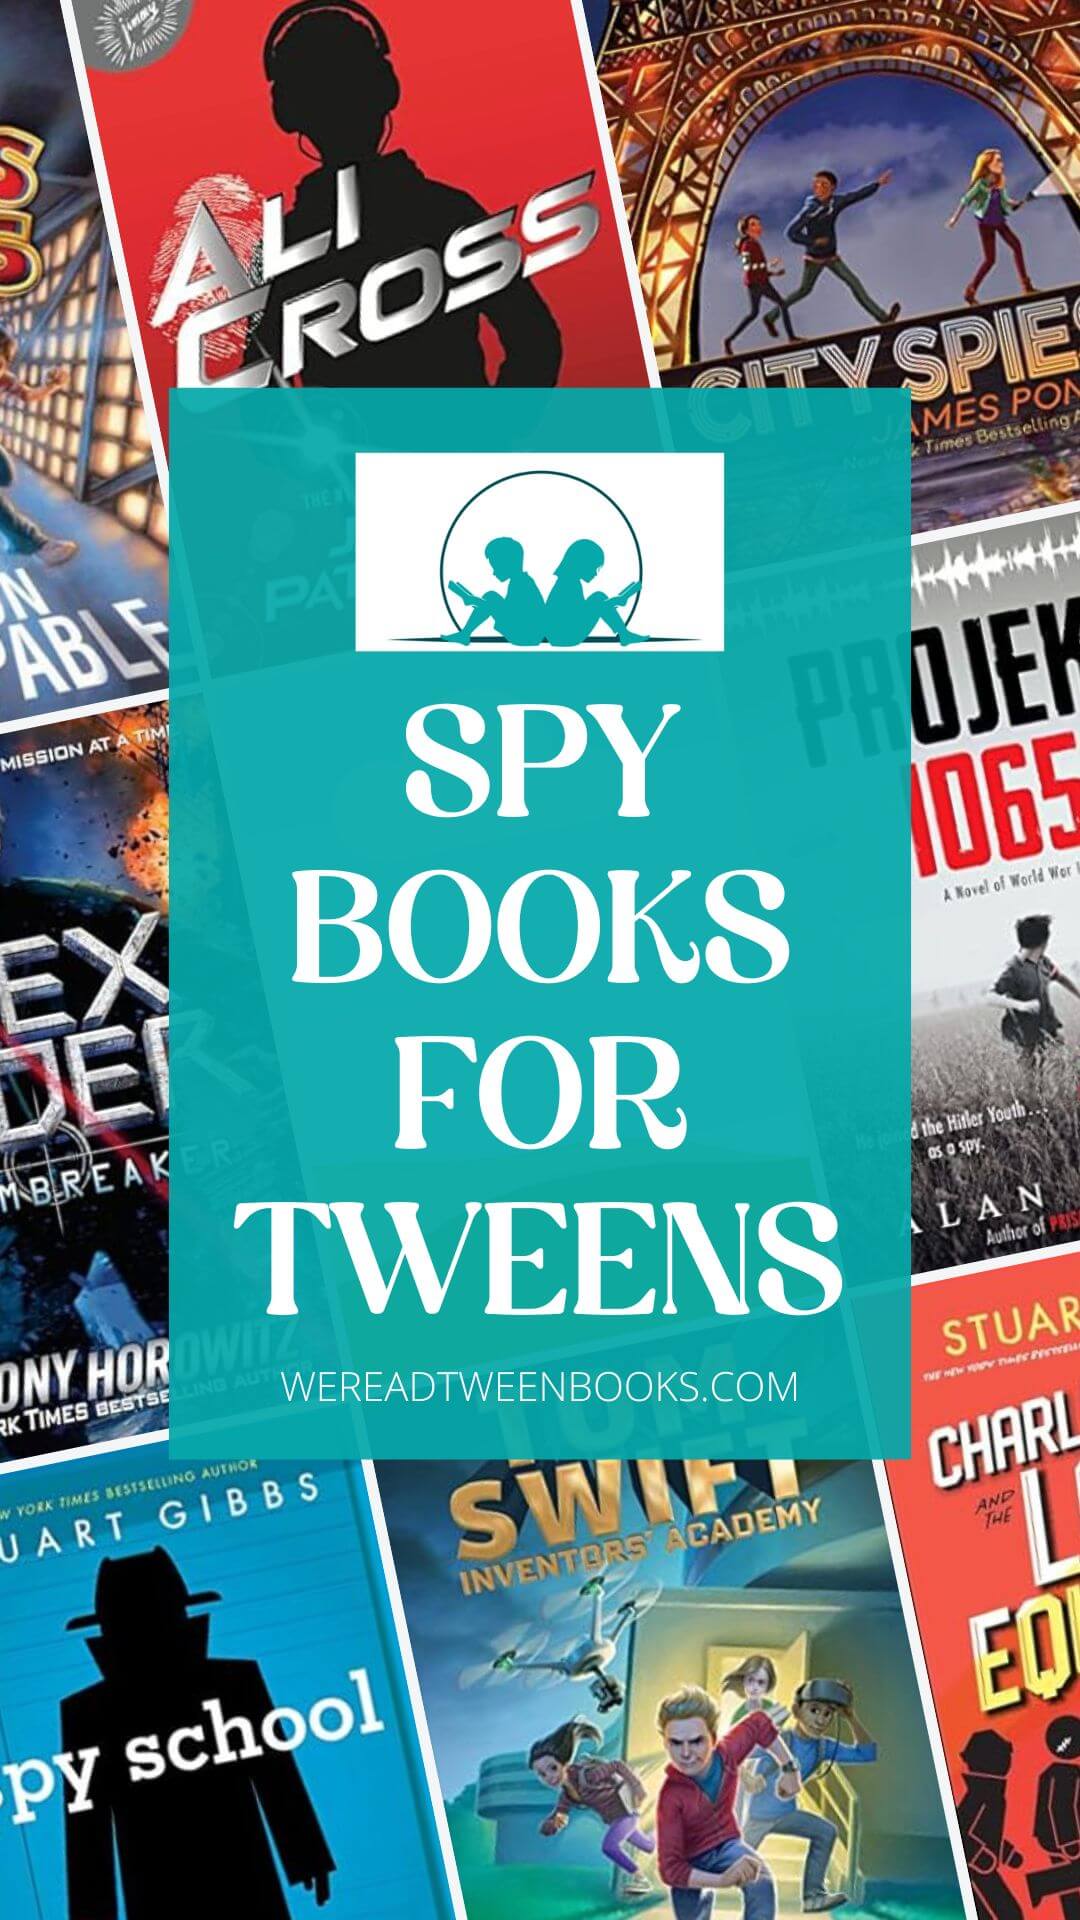 Discover the ultimate list of spy books for kids and tweens from book bloggers, We Read Tween Books, if you like books about spies and espionage.